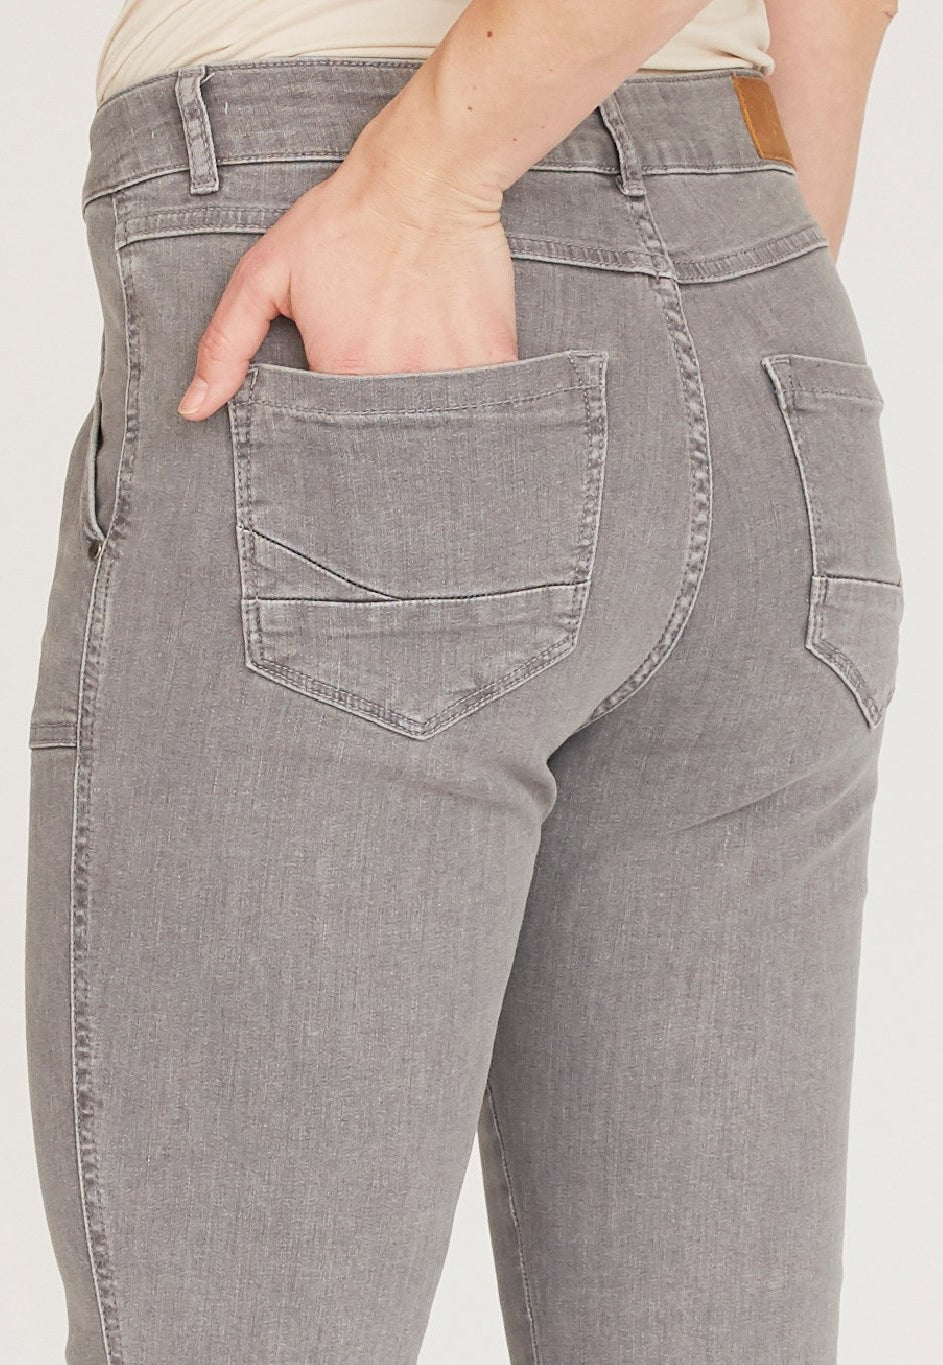 Jeans Como flare, light grey washed